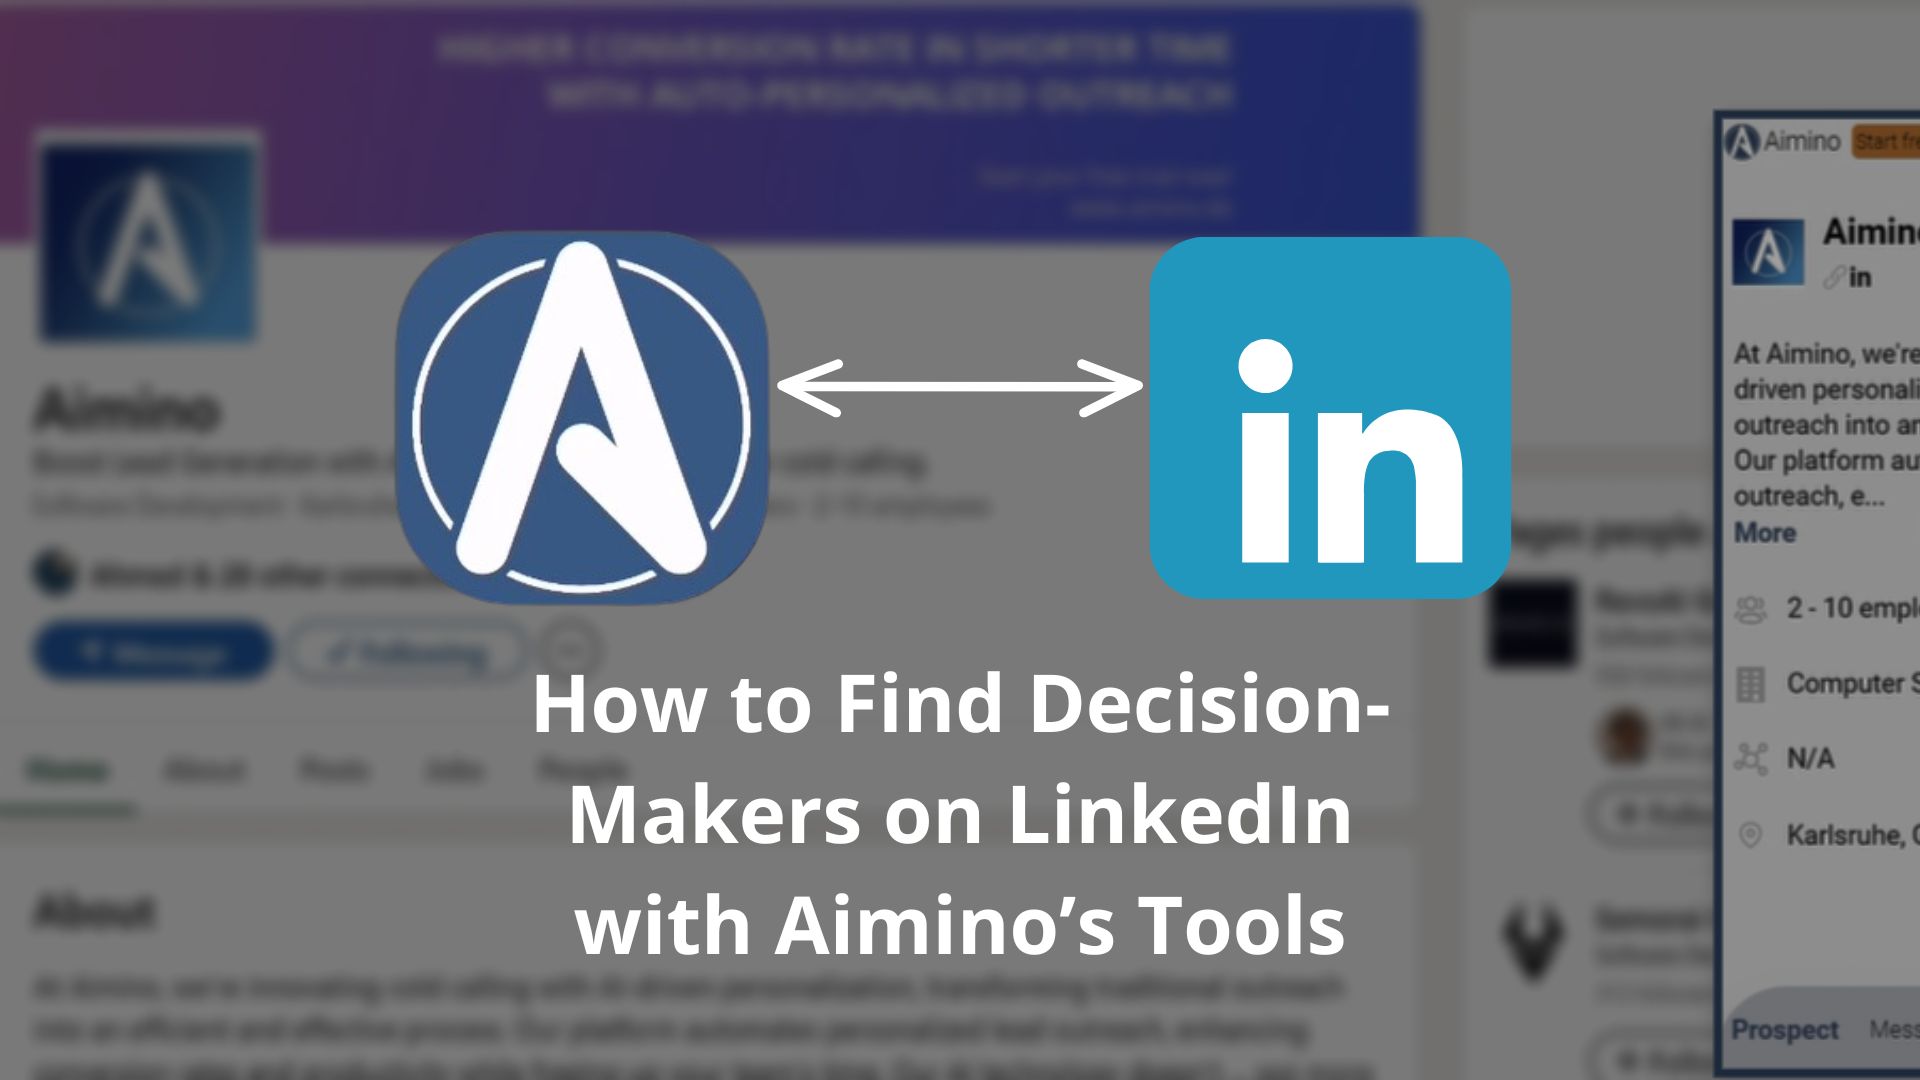 How to Find Decision-Makers on LinkedIn with Aimino’s Tools